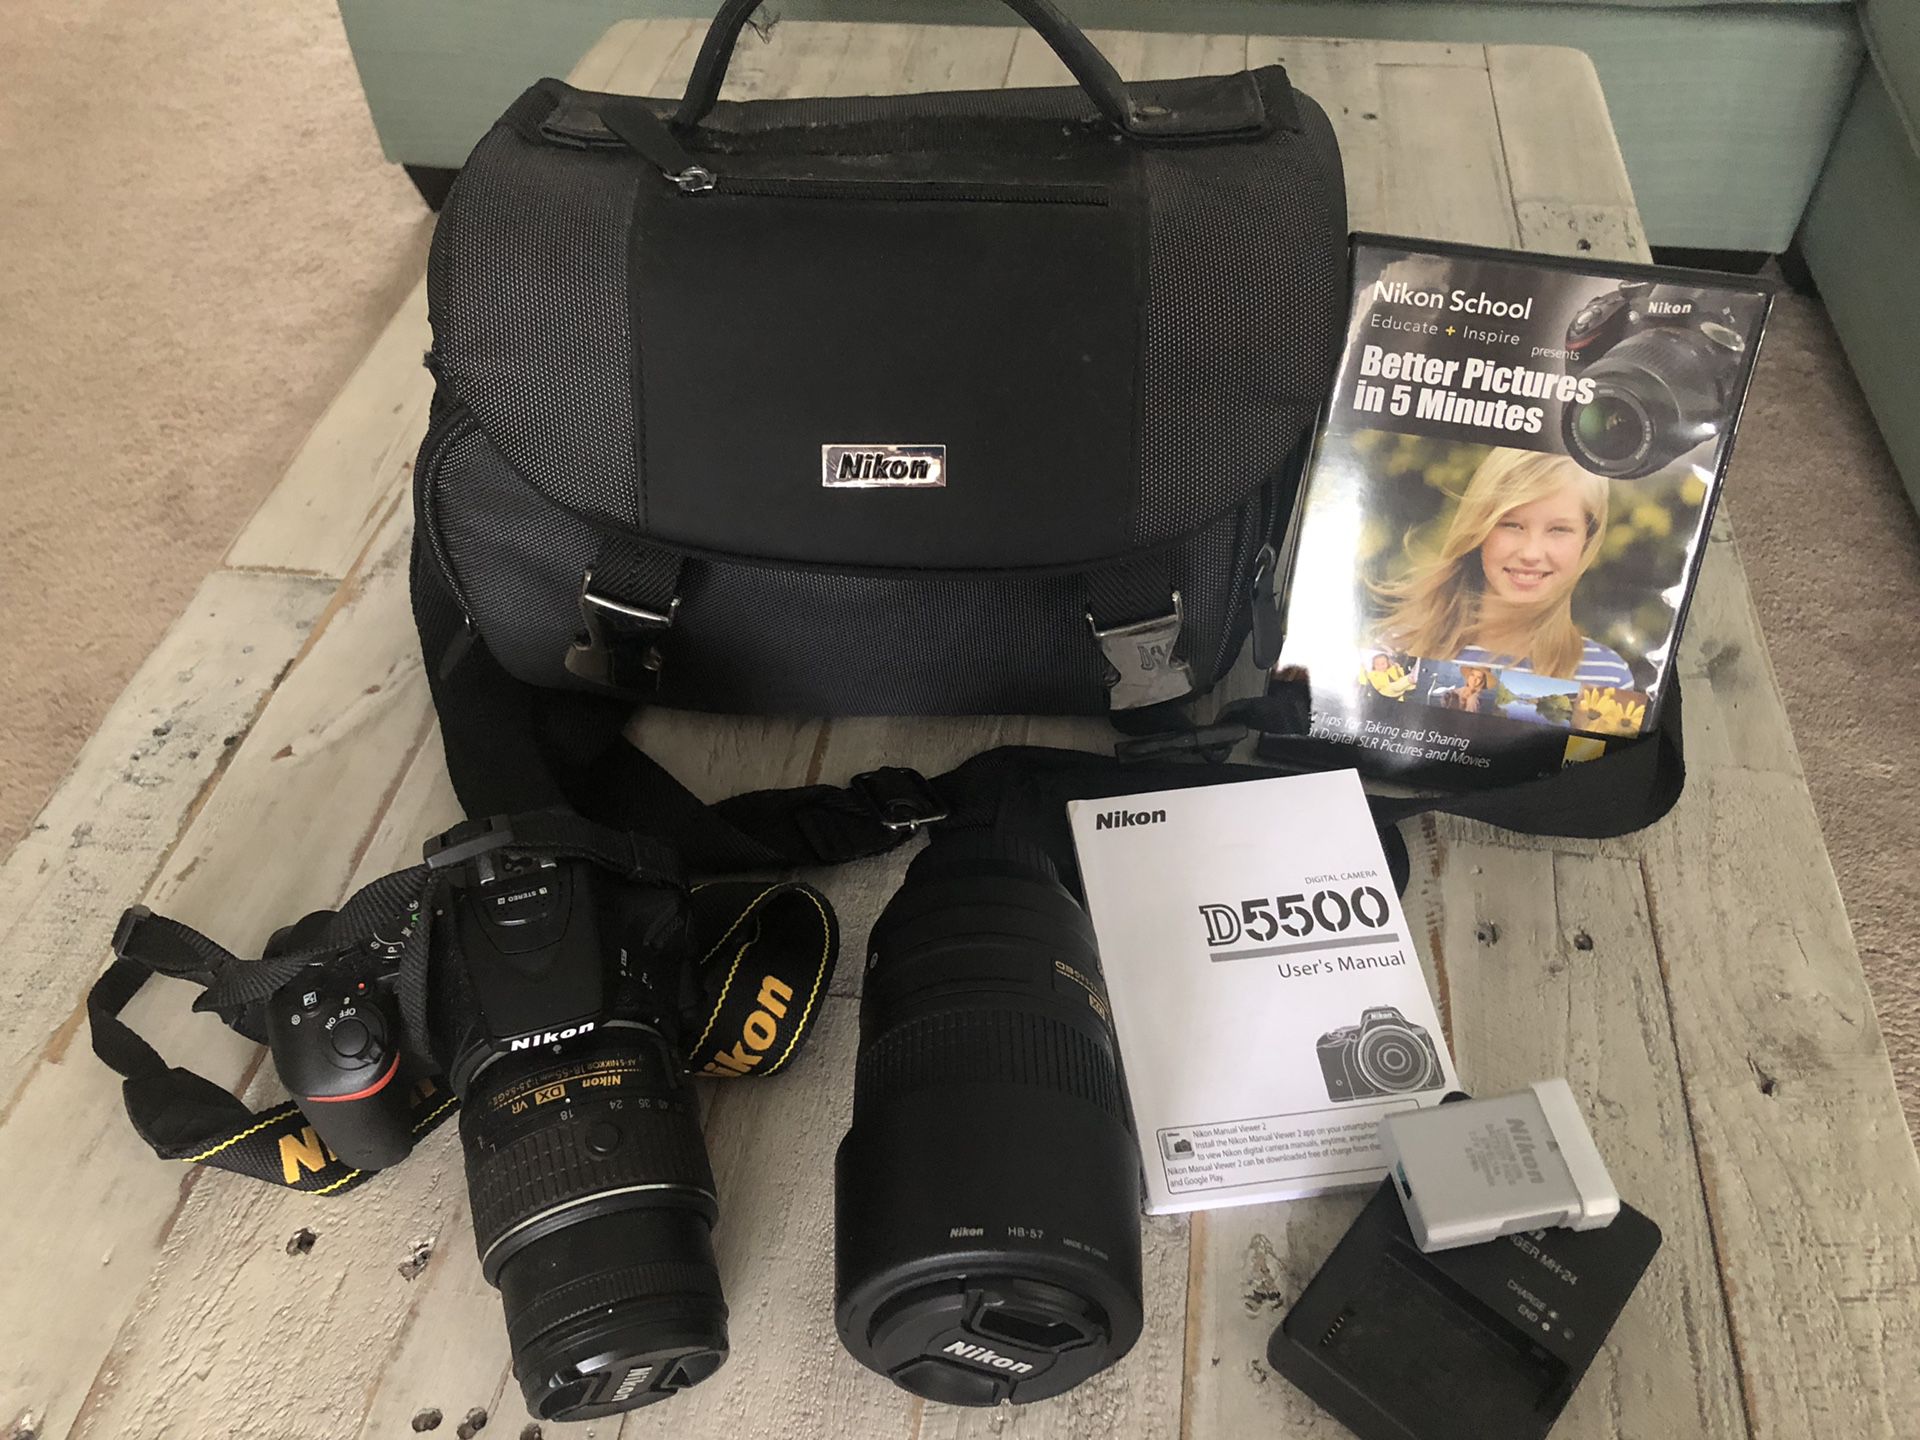 Nikon D5500 With 2 lenses, 2 batteries, battery charger, memory card, user manual and dvd, and camera bag